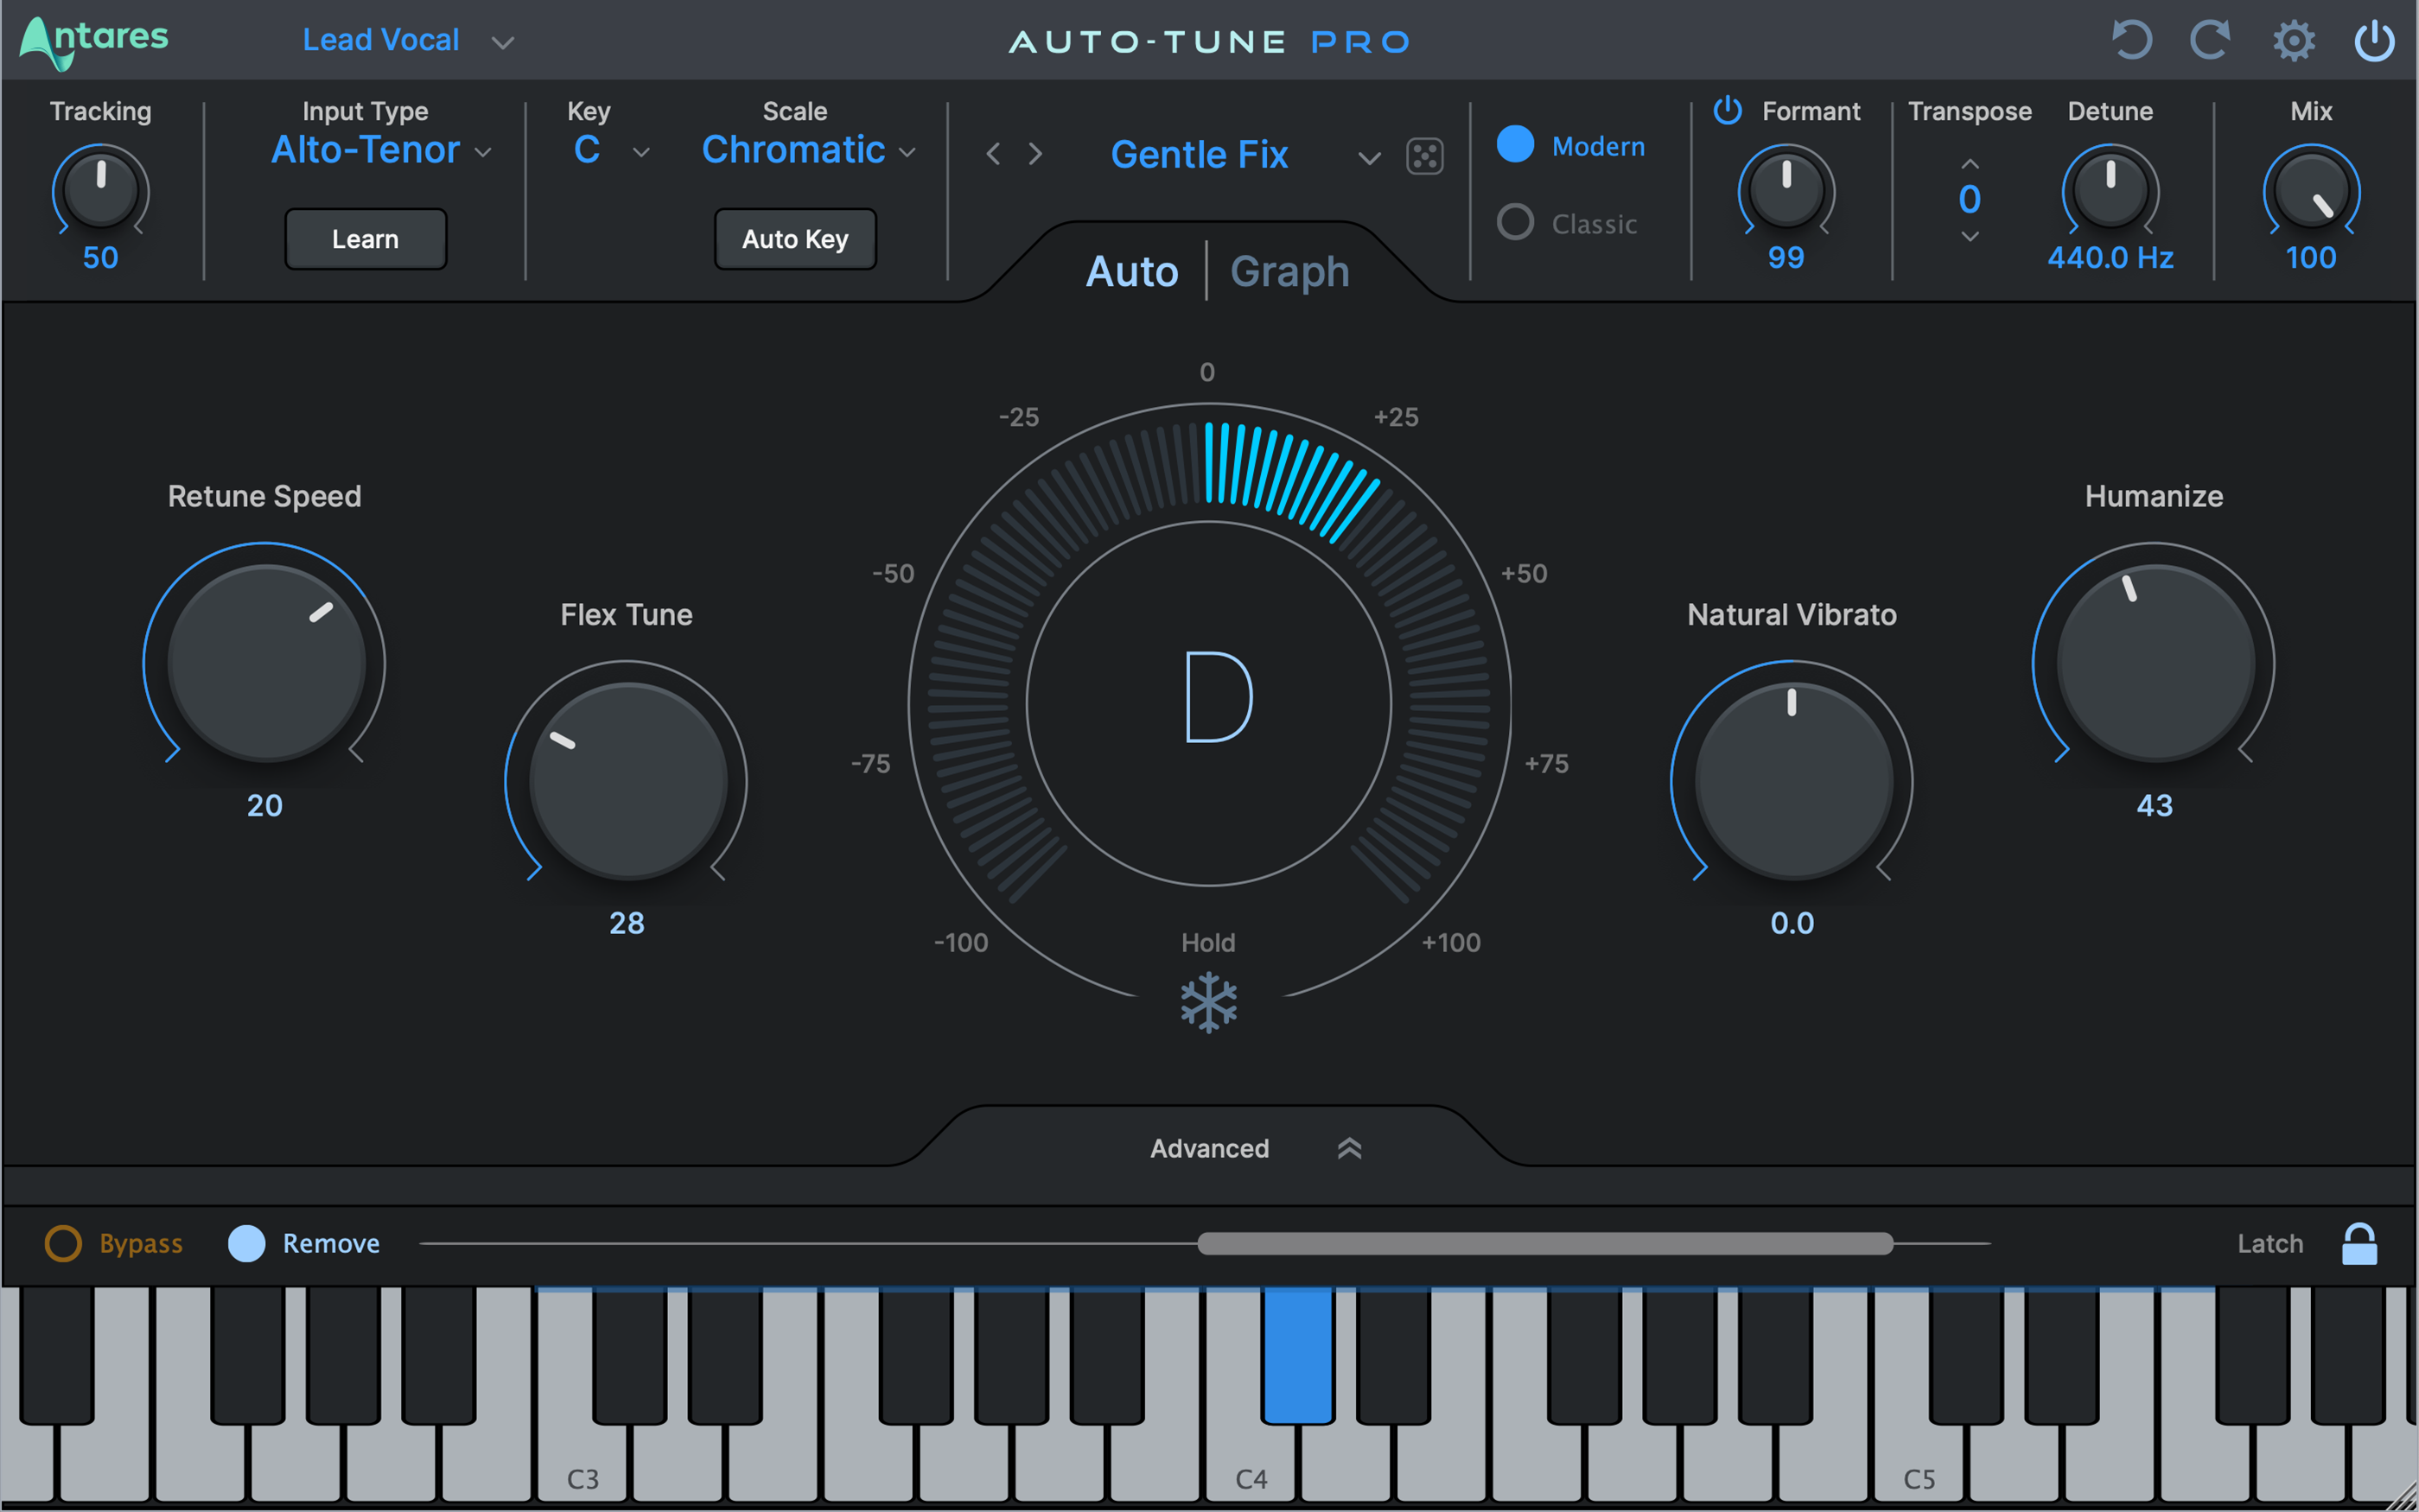 Antares Auto-Tune Pro X Pitch Correction and Vocal Effects Plug-in